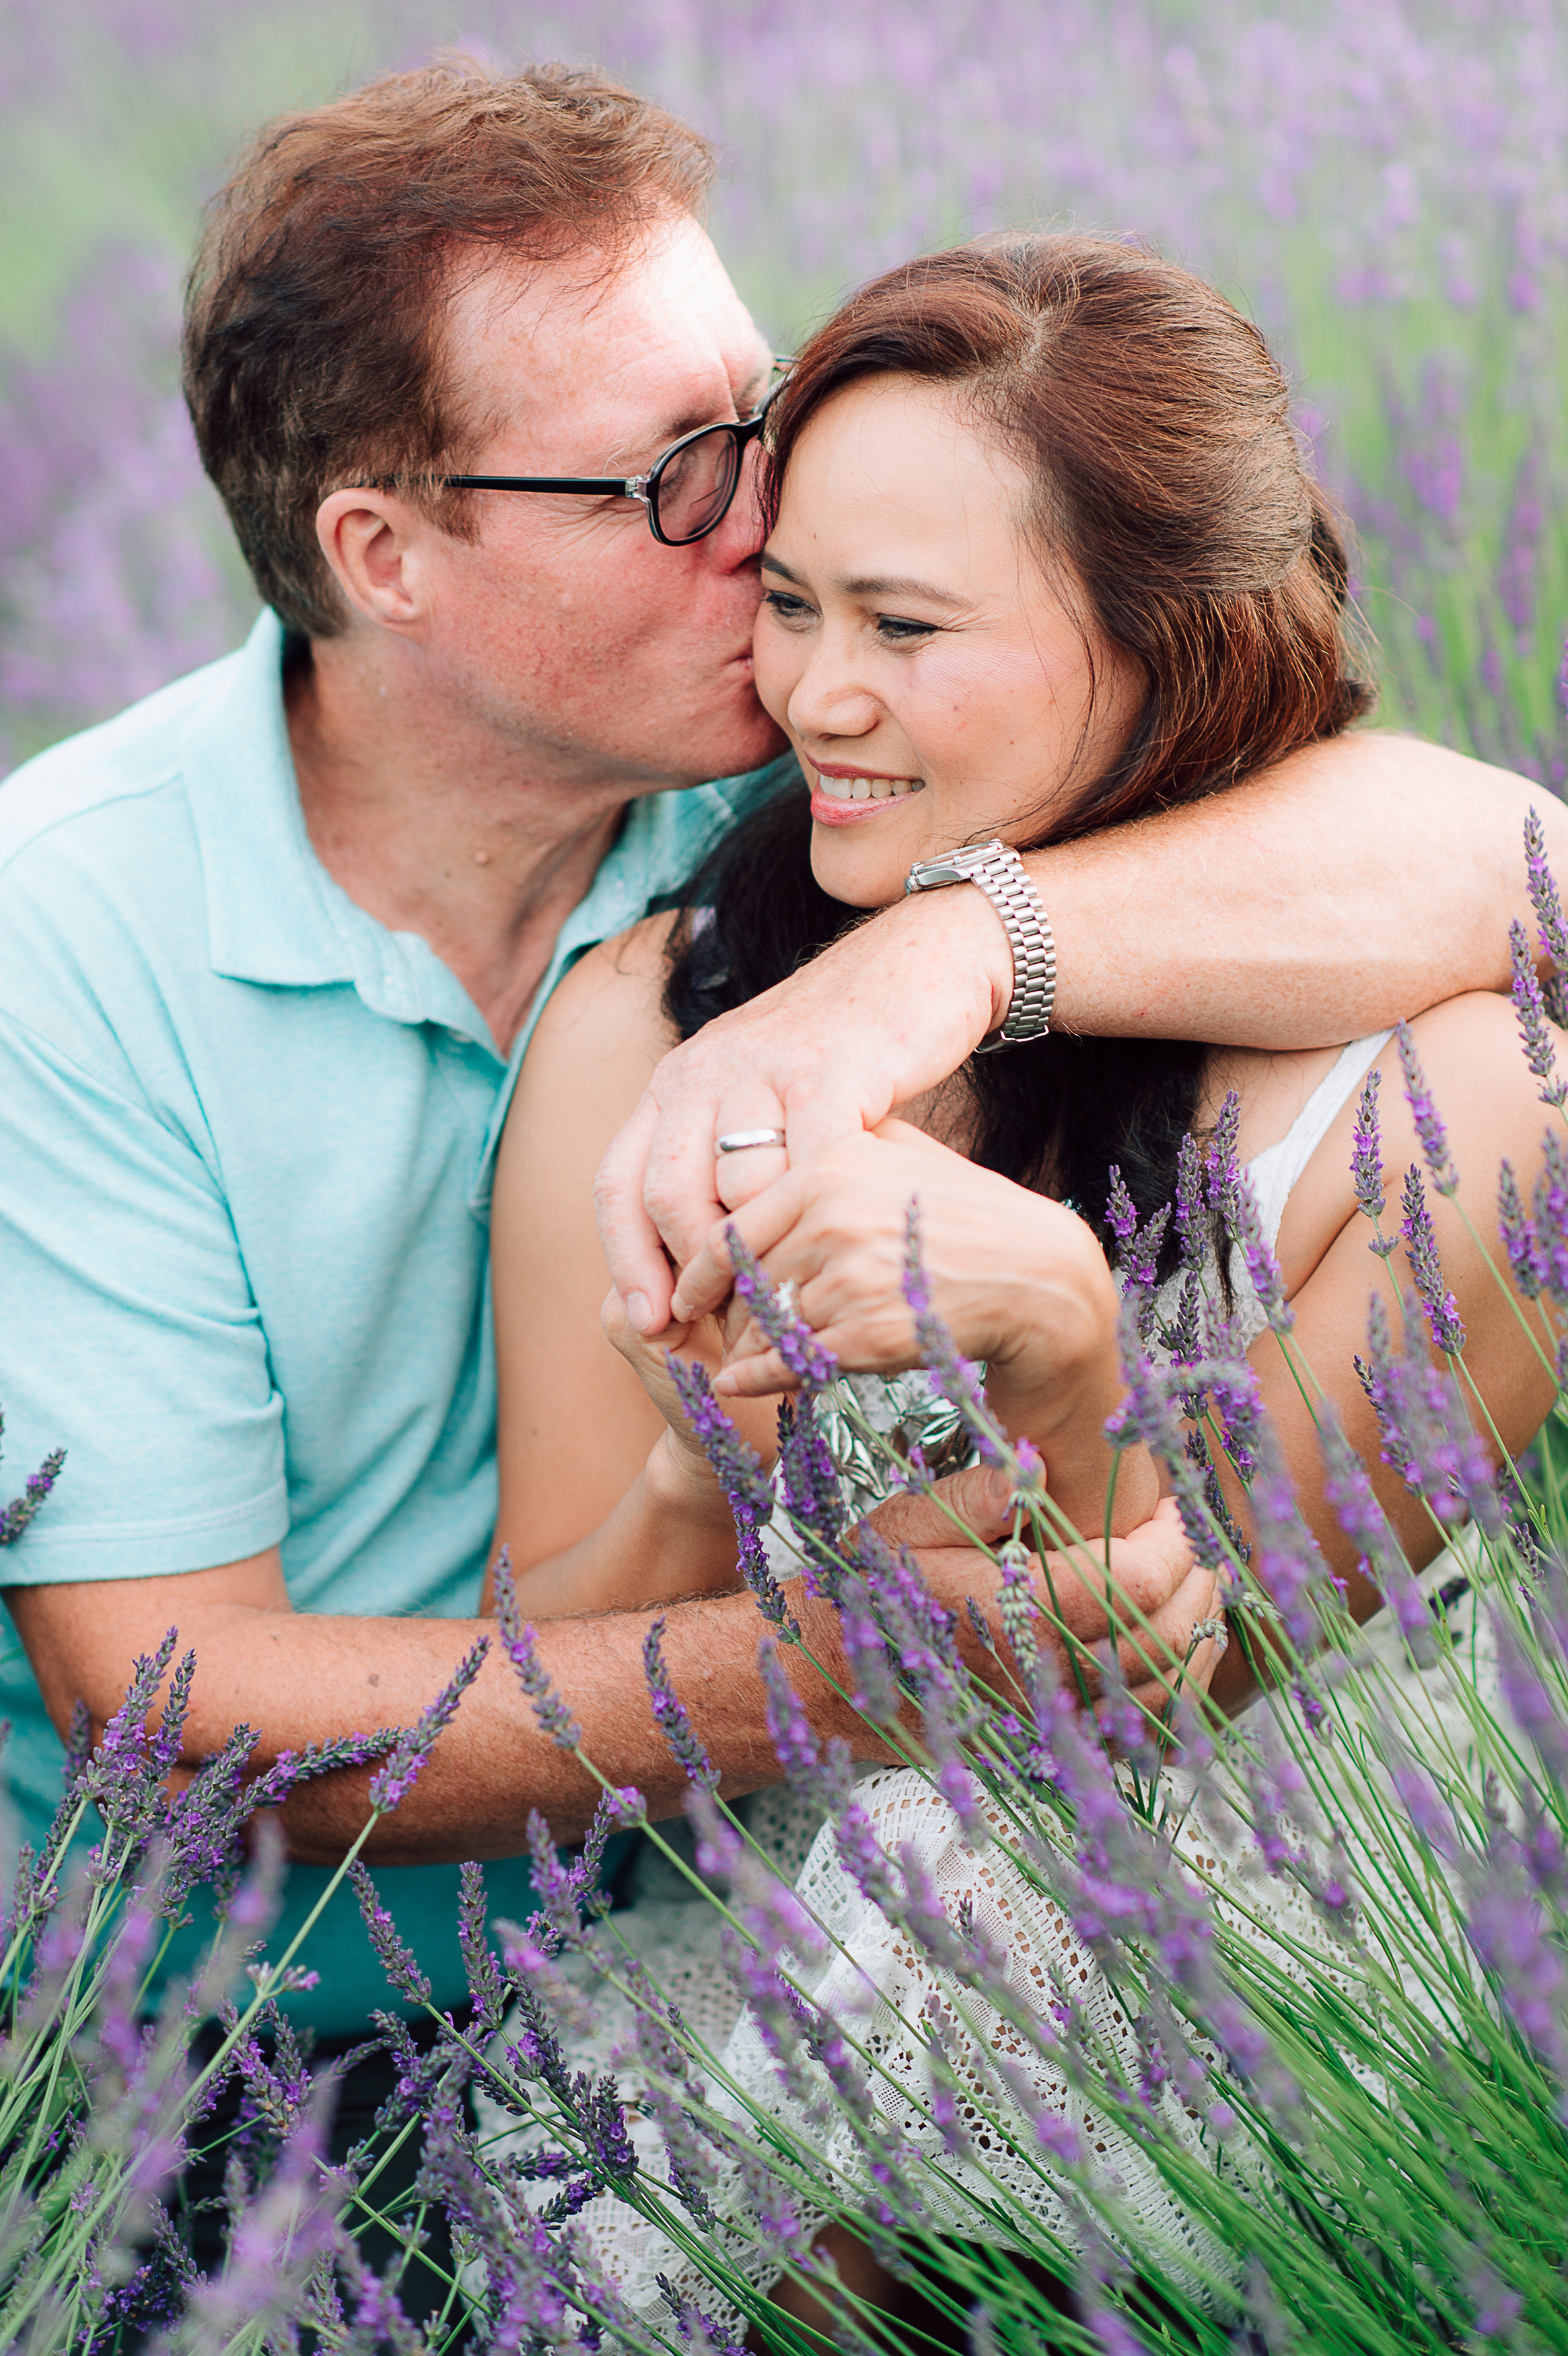 engagement_lavenderfield_youseephotography_LidiaOtto (31).jpg